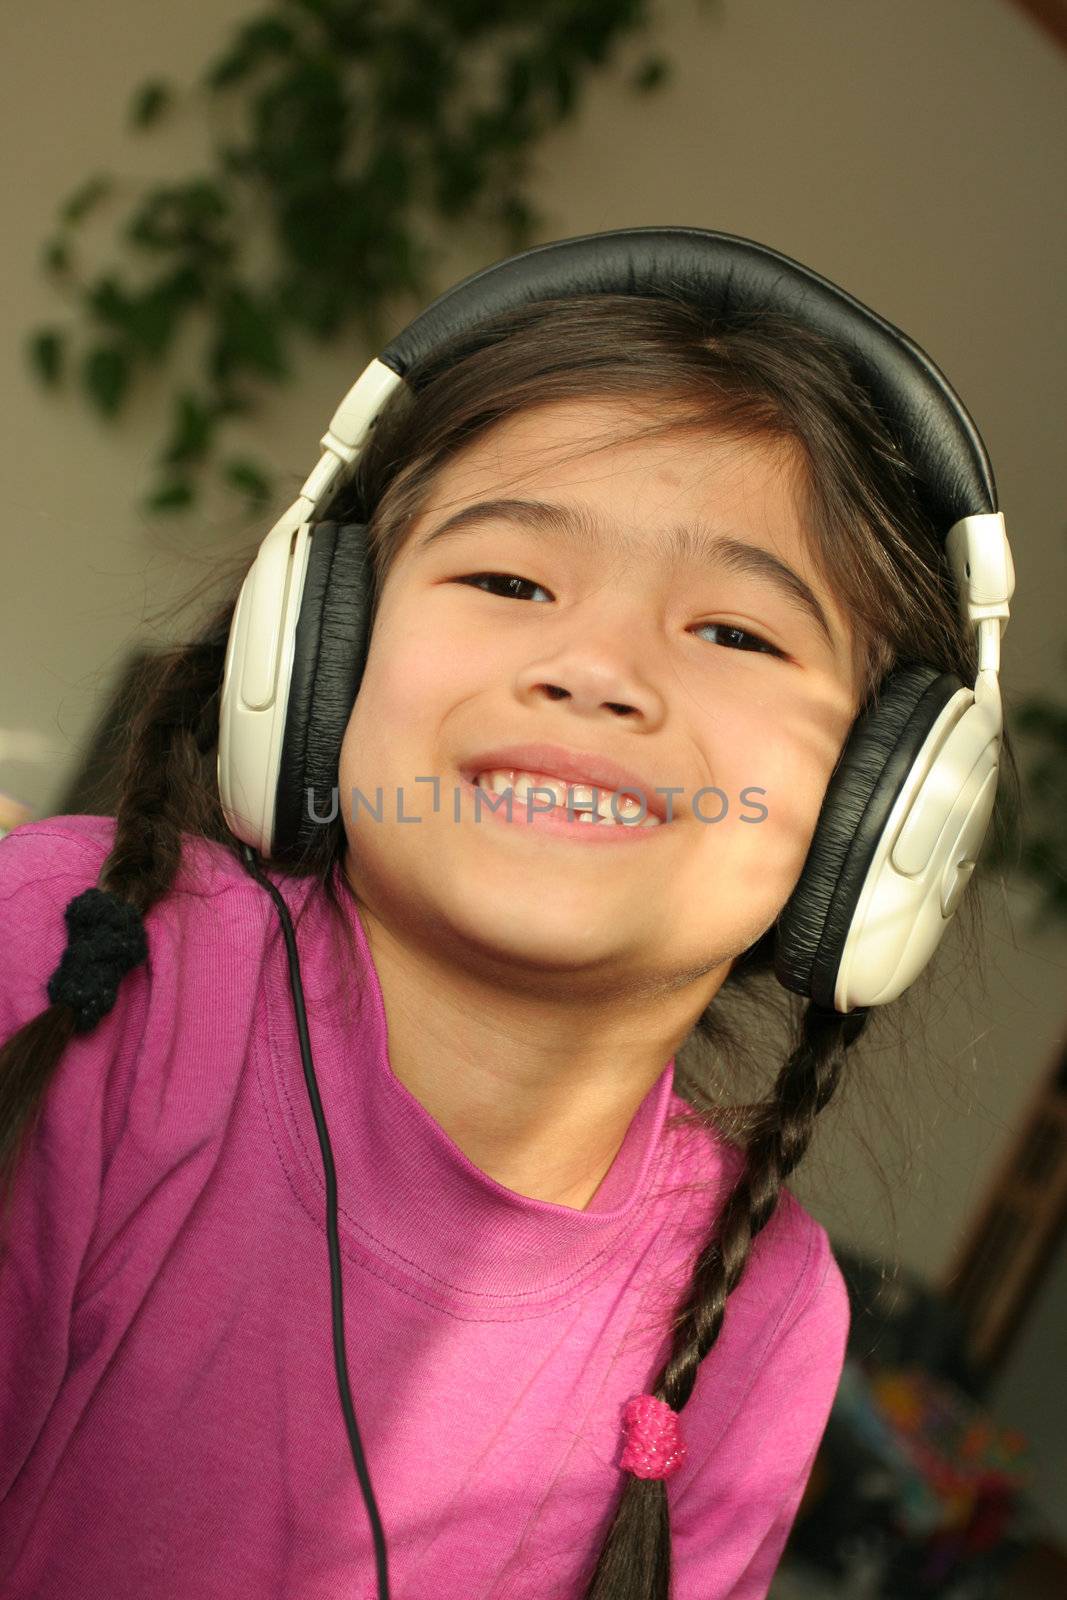 Six year old listening to music with headphones